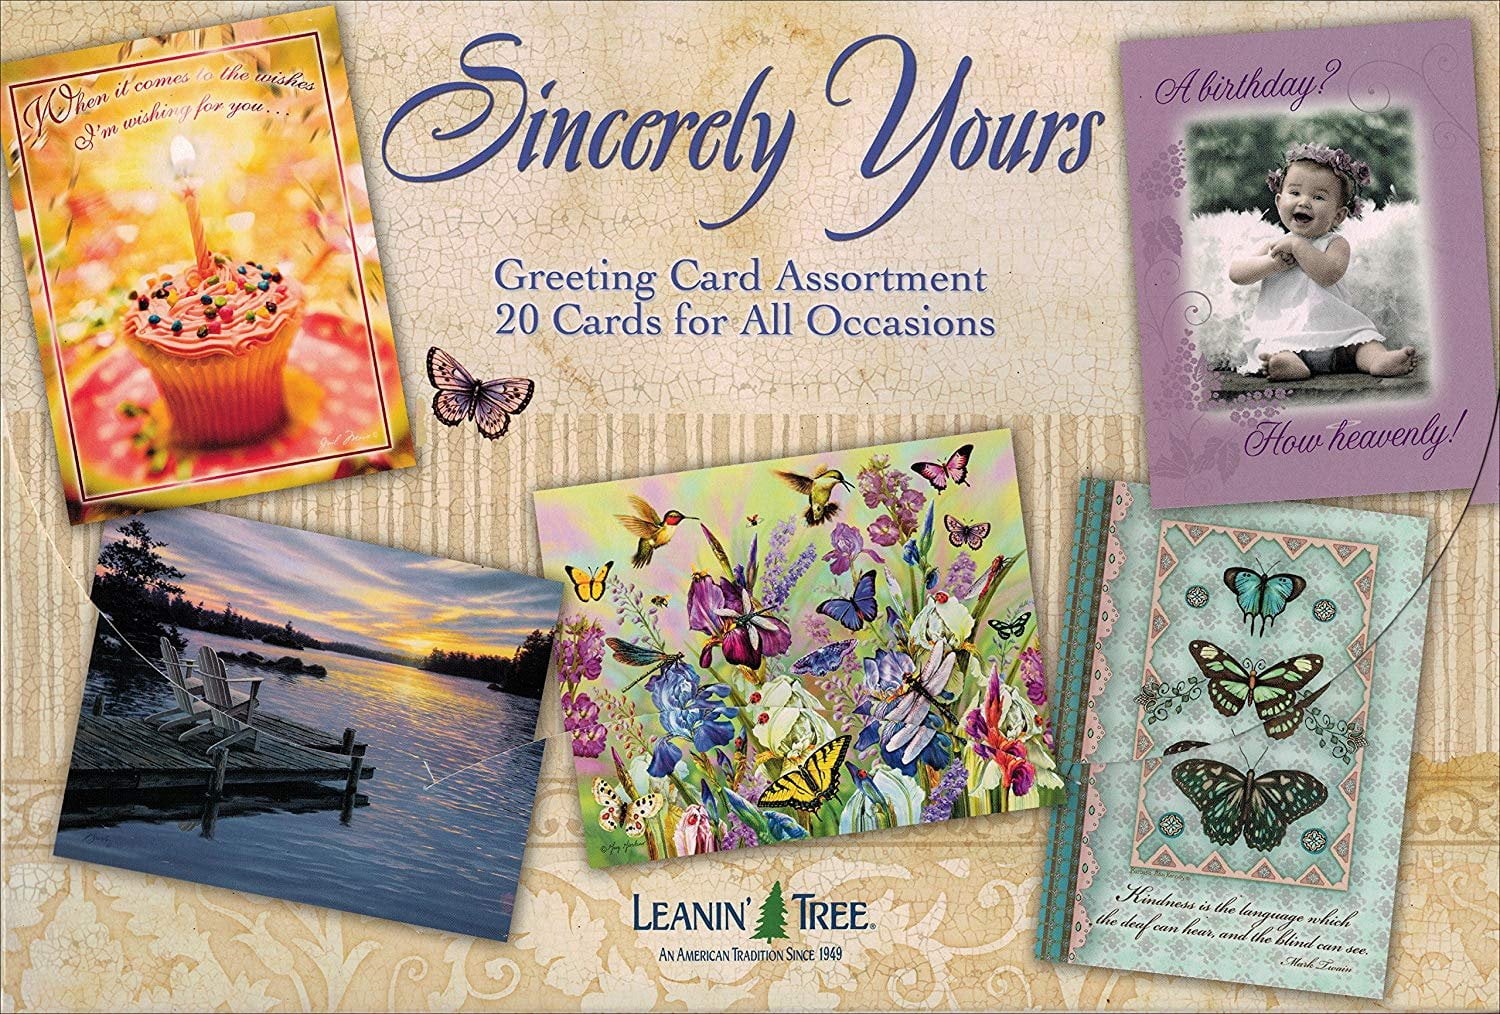 Sincerely Yours - All Occasion Greeting Card Assortment Boxed Greeting Cards - 20 Cards & 22 ...